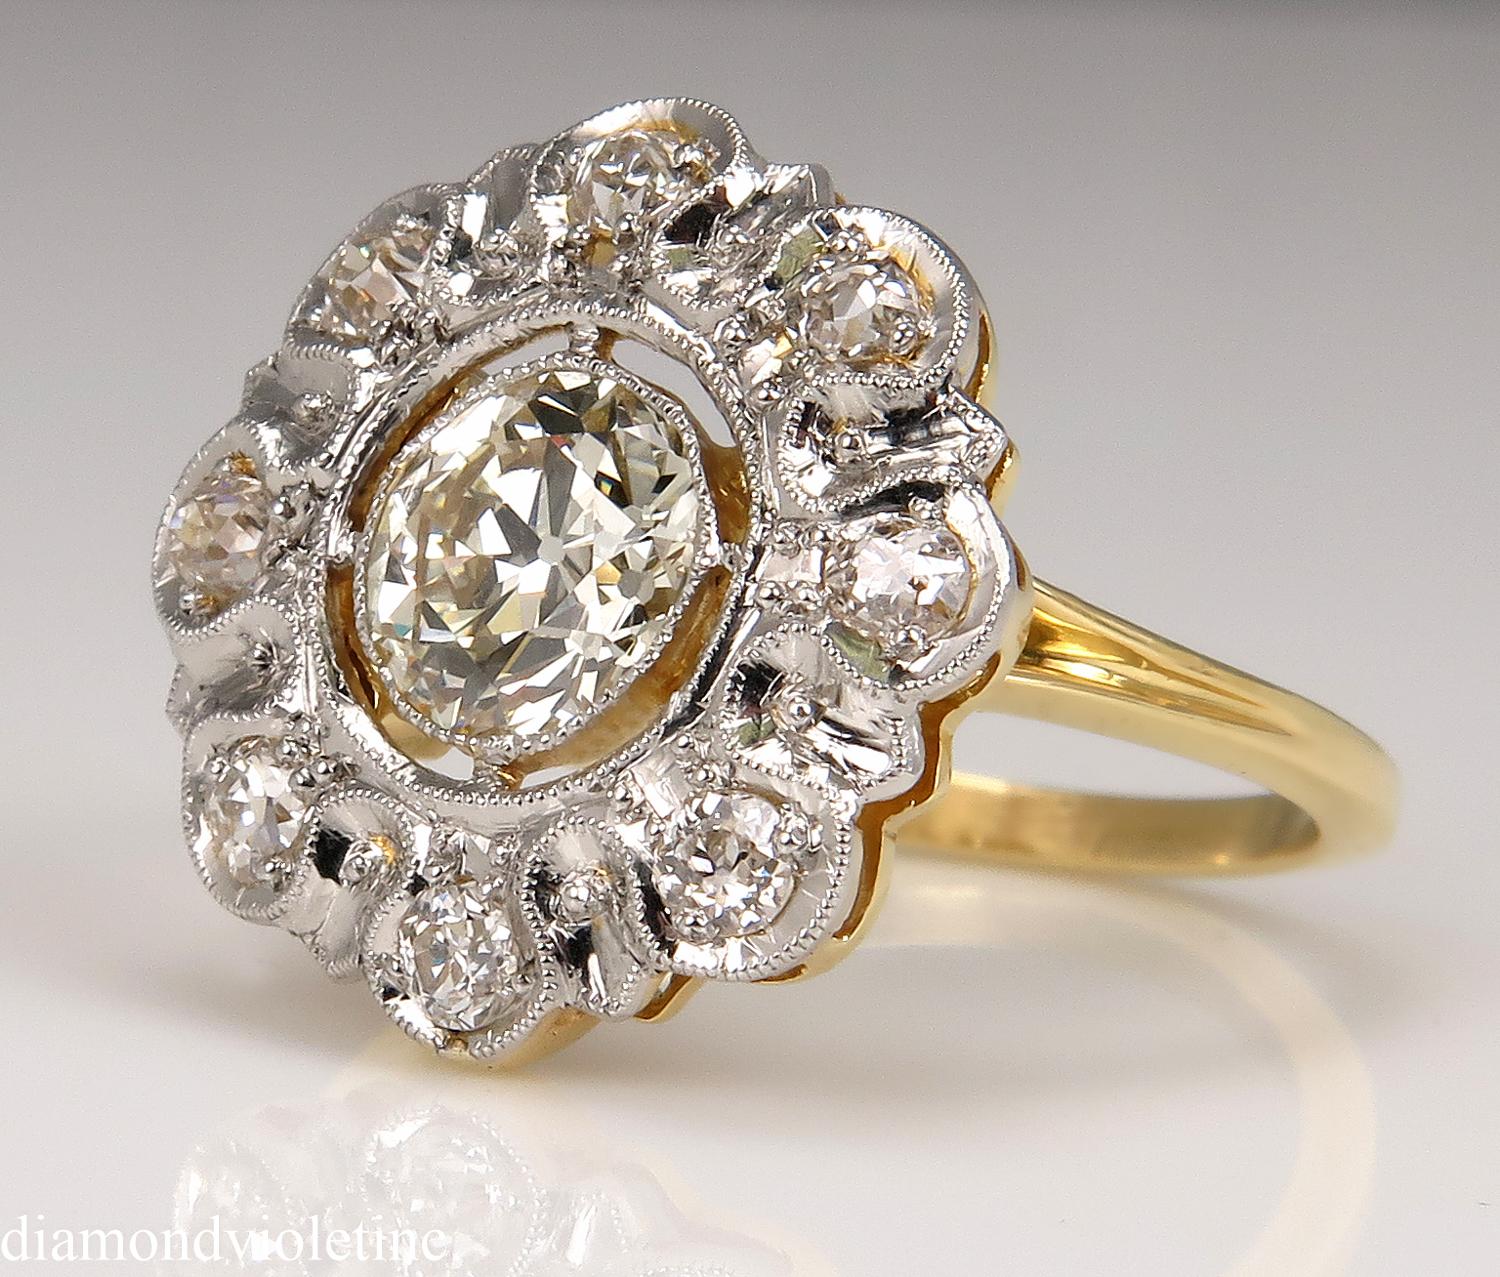 This breathtakingly beautiful and Delicate CIRCA 1900s Authentic Edwardian EUROPEAN-MADE Flower shaped 18k Yellow Gold Ring (tested), the Center Stone is EGL USA Certified 0.92ct OLD European Cut Diamond in H-I, VS2 clarity (Near colorless and very